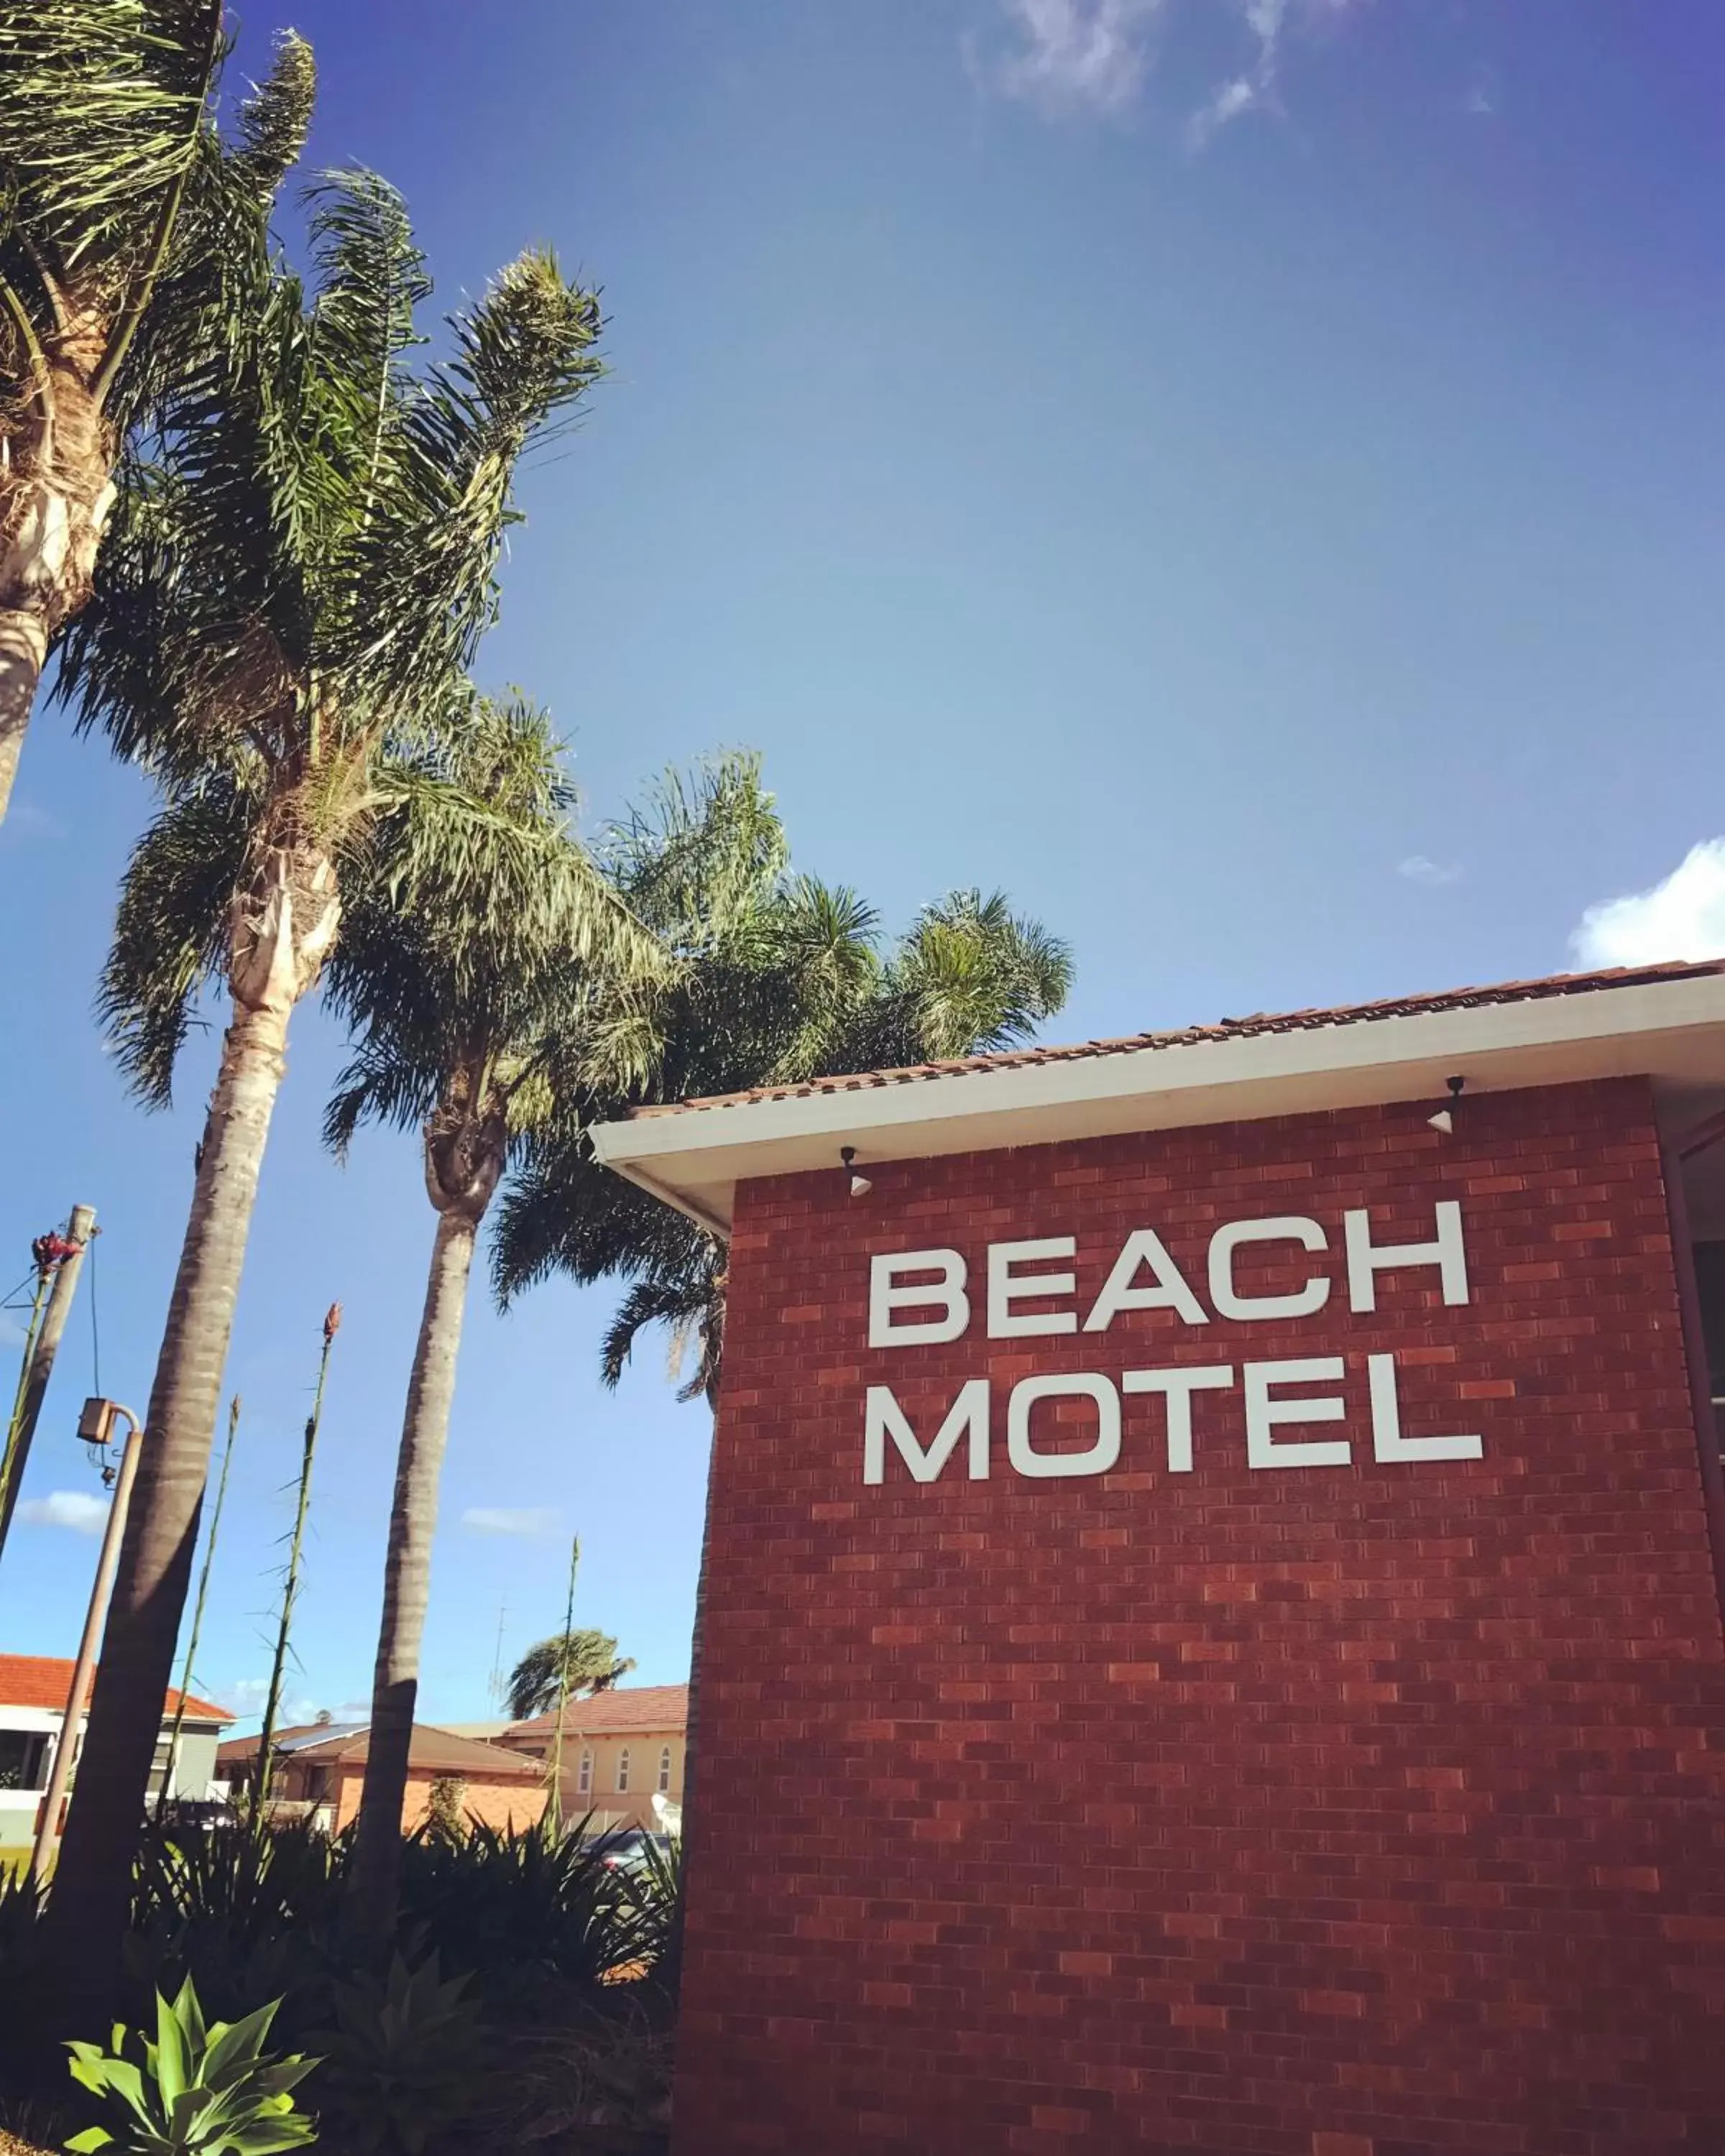 Property building in Thirroul Beach Motel